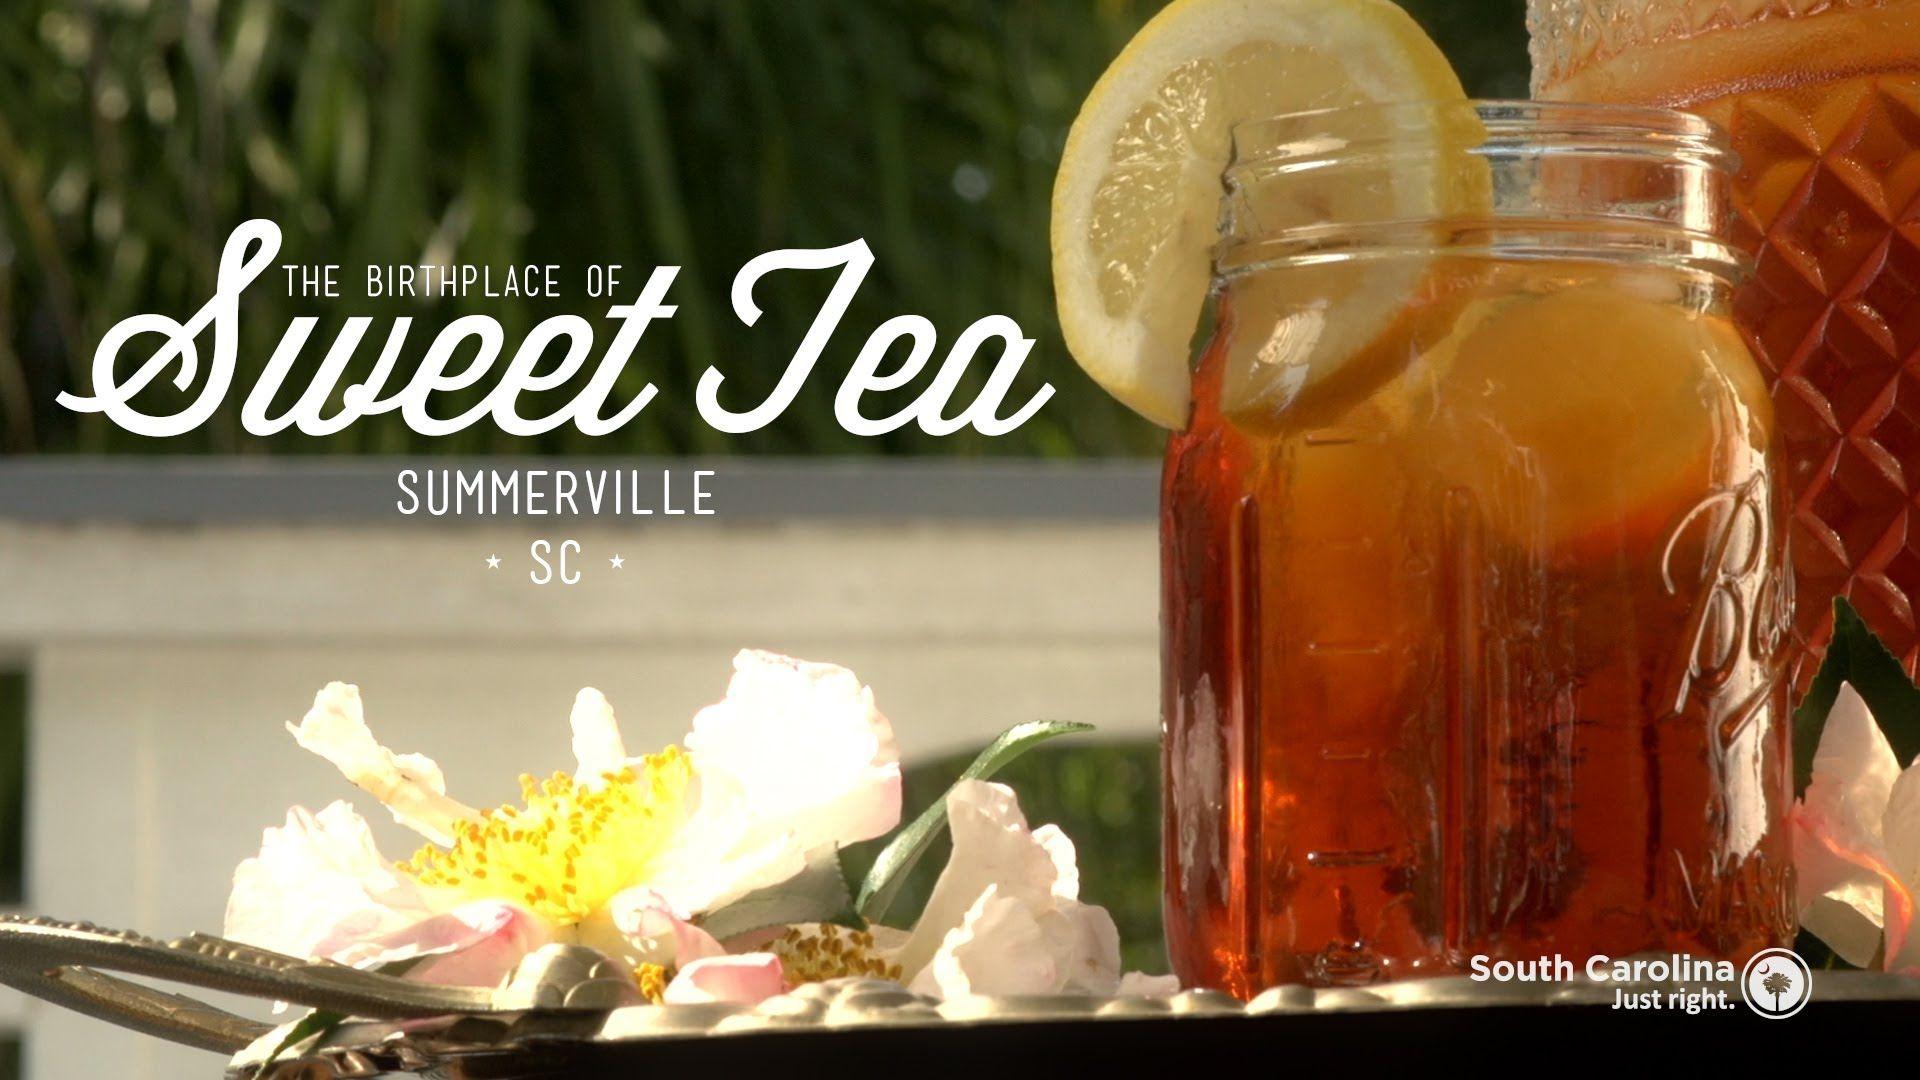 The Birthplace of Sweet Tea